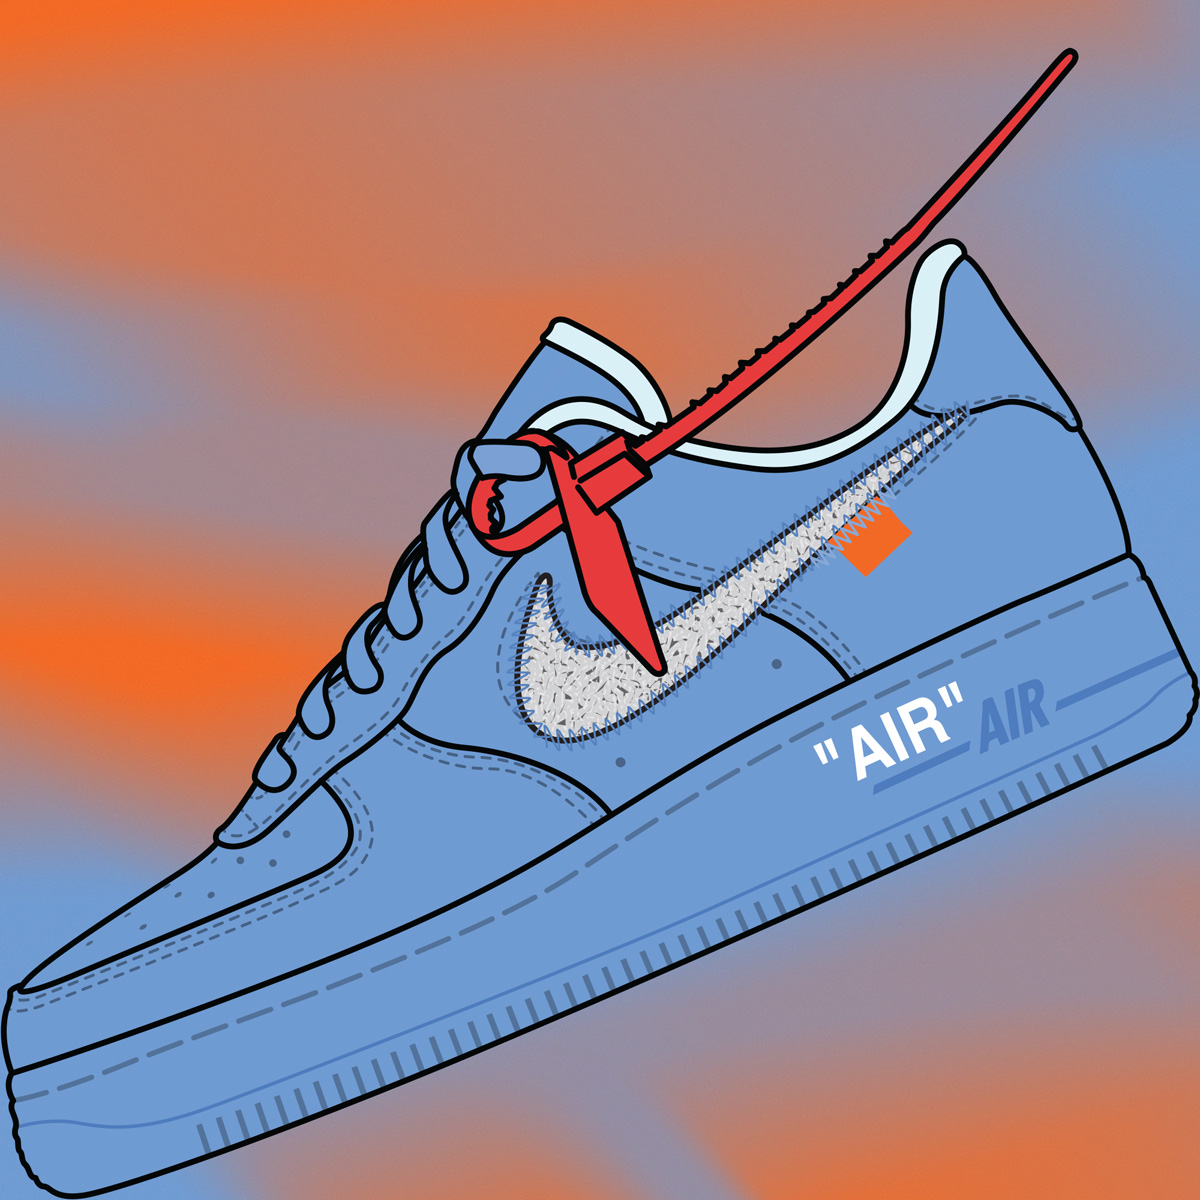 Virgil Abloh's 'MCA' Air Force 1 Dropped on Nike SNKRS Stash